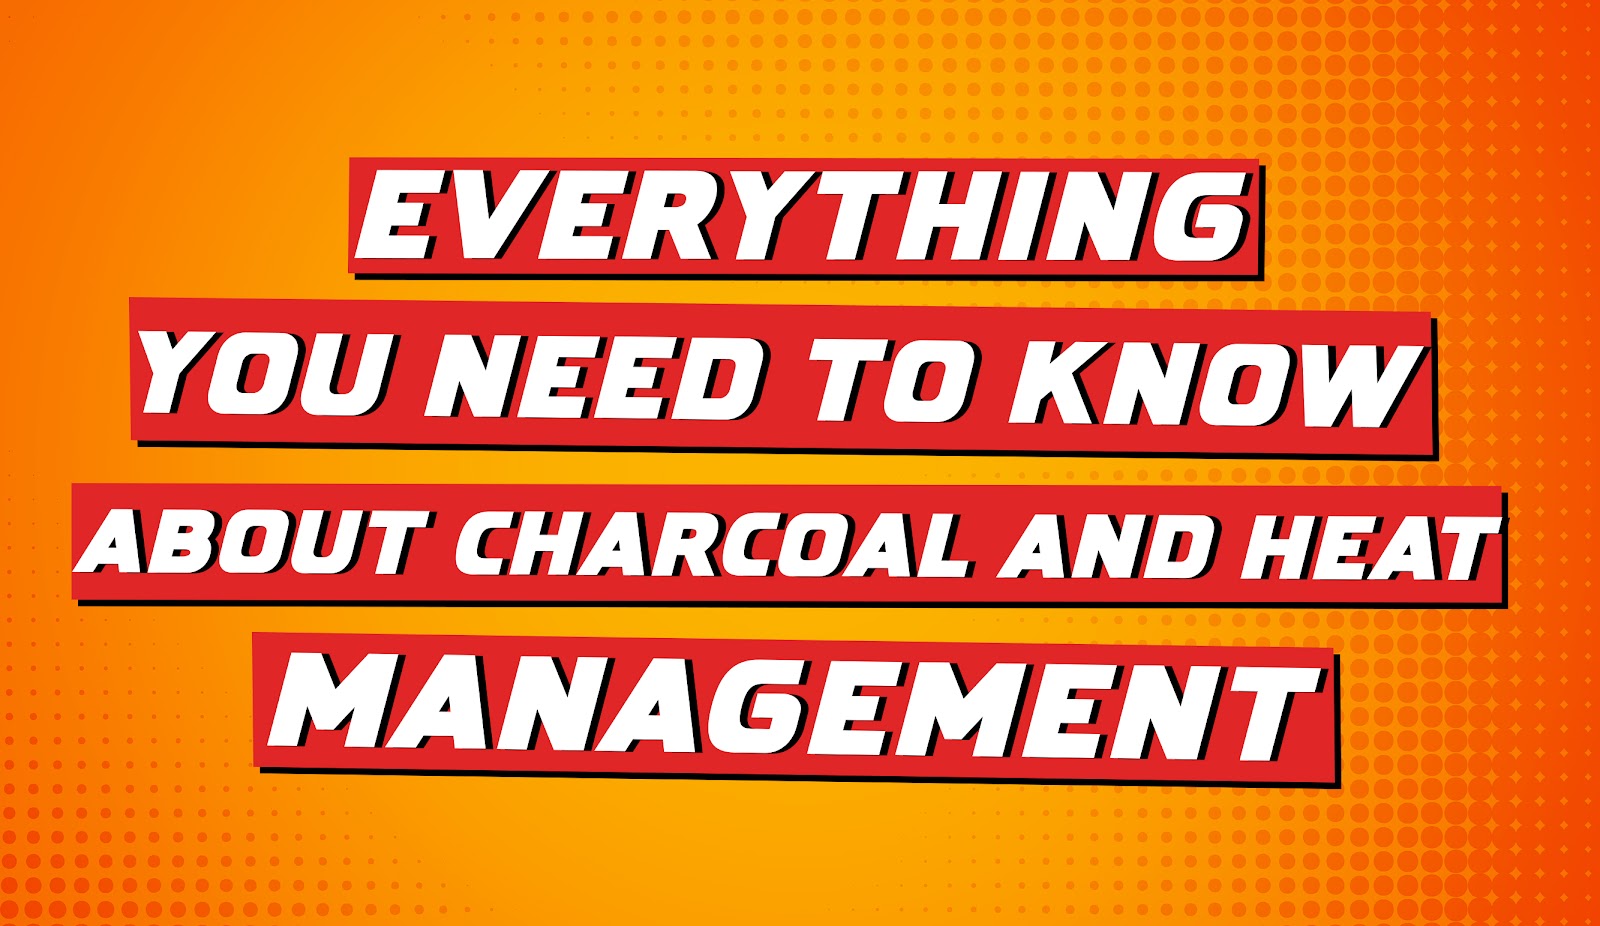 Everything You Need to Know About Charcoal and Heat Management